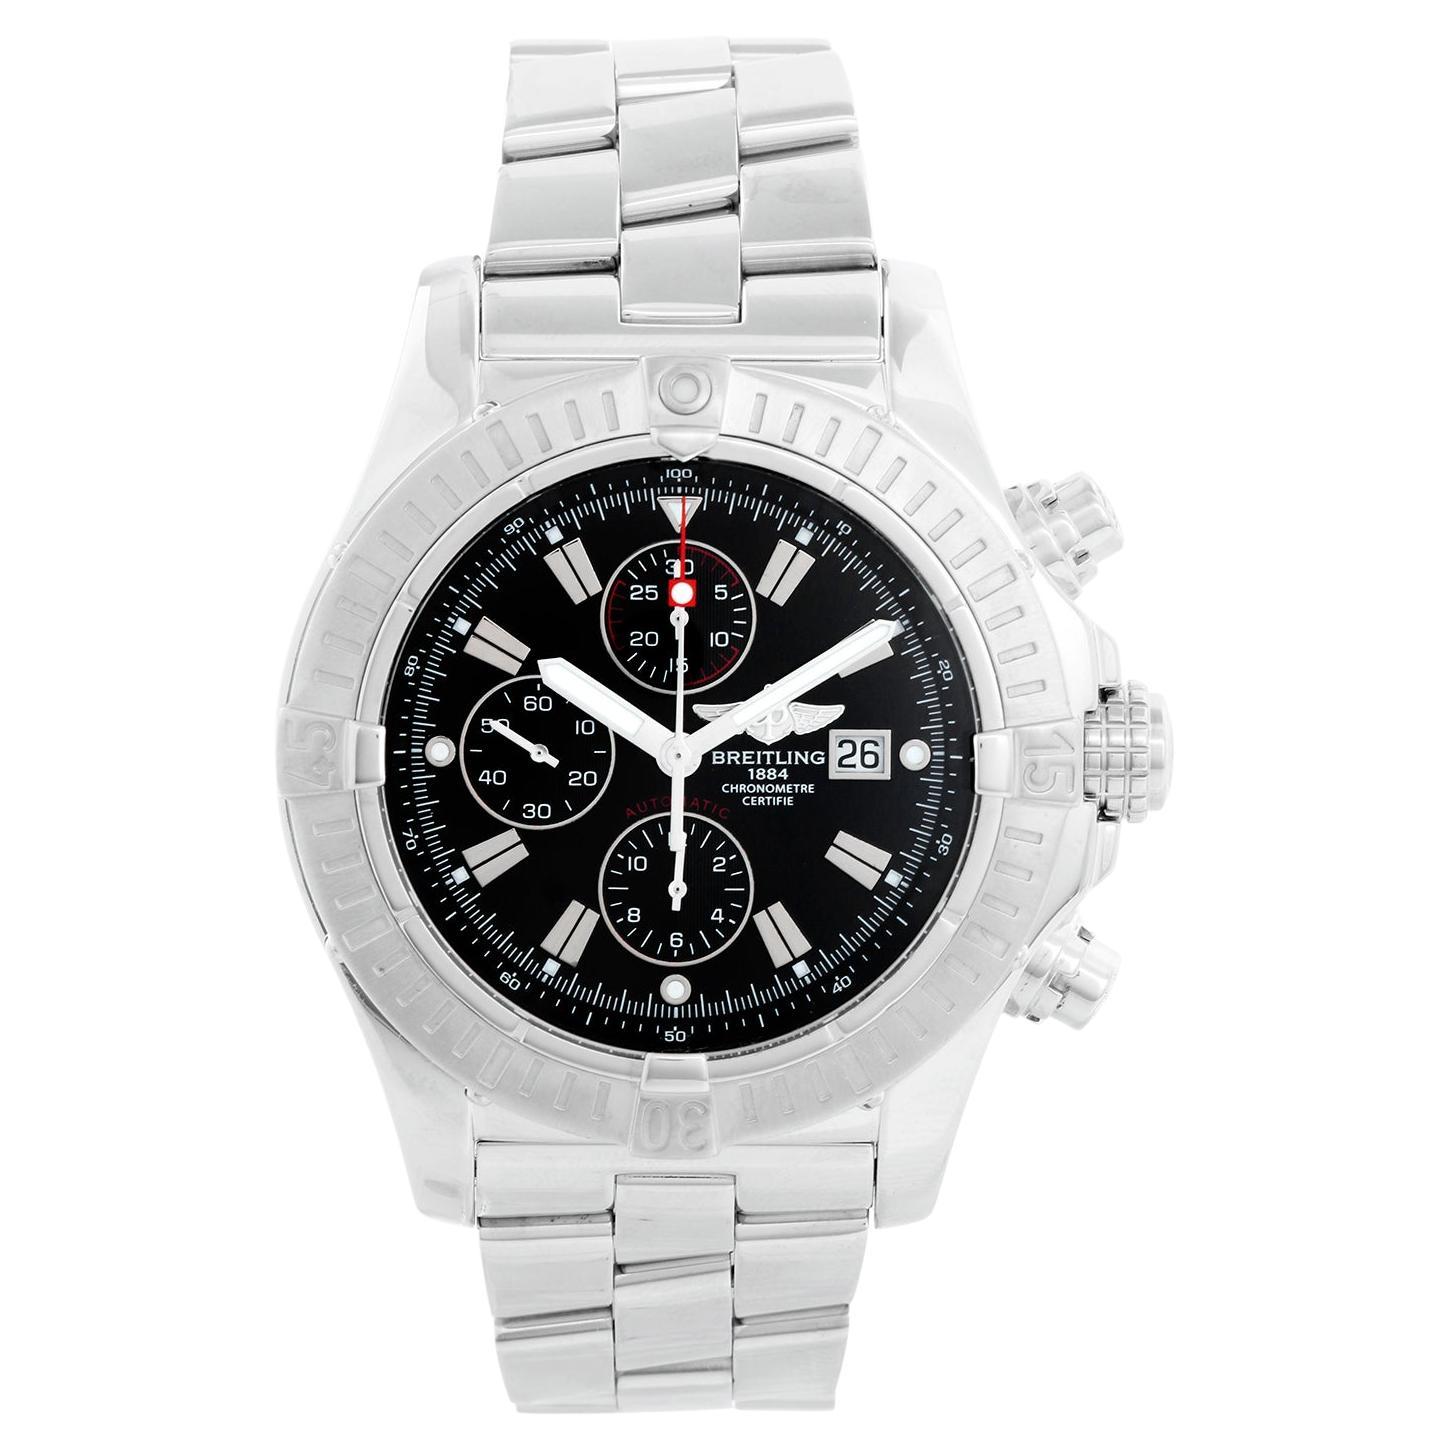 Breitling Avenger Black Dial Men's Chrono Stainless Steel Watch A13370 For Sale